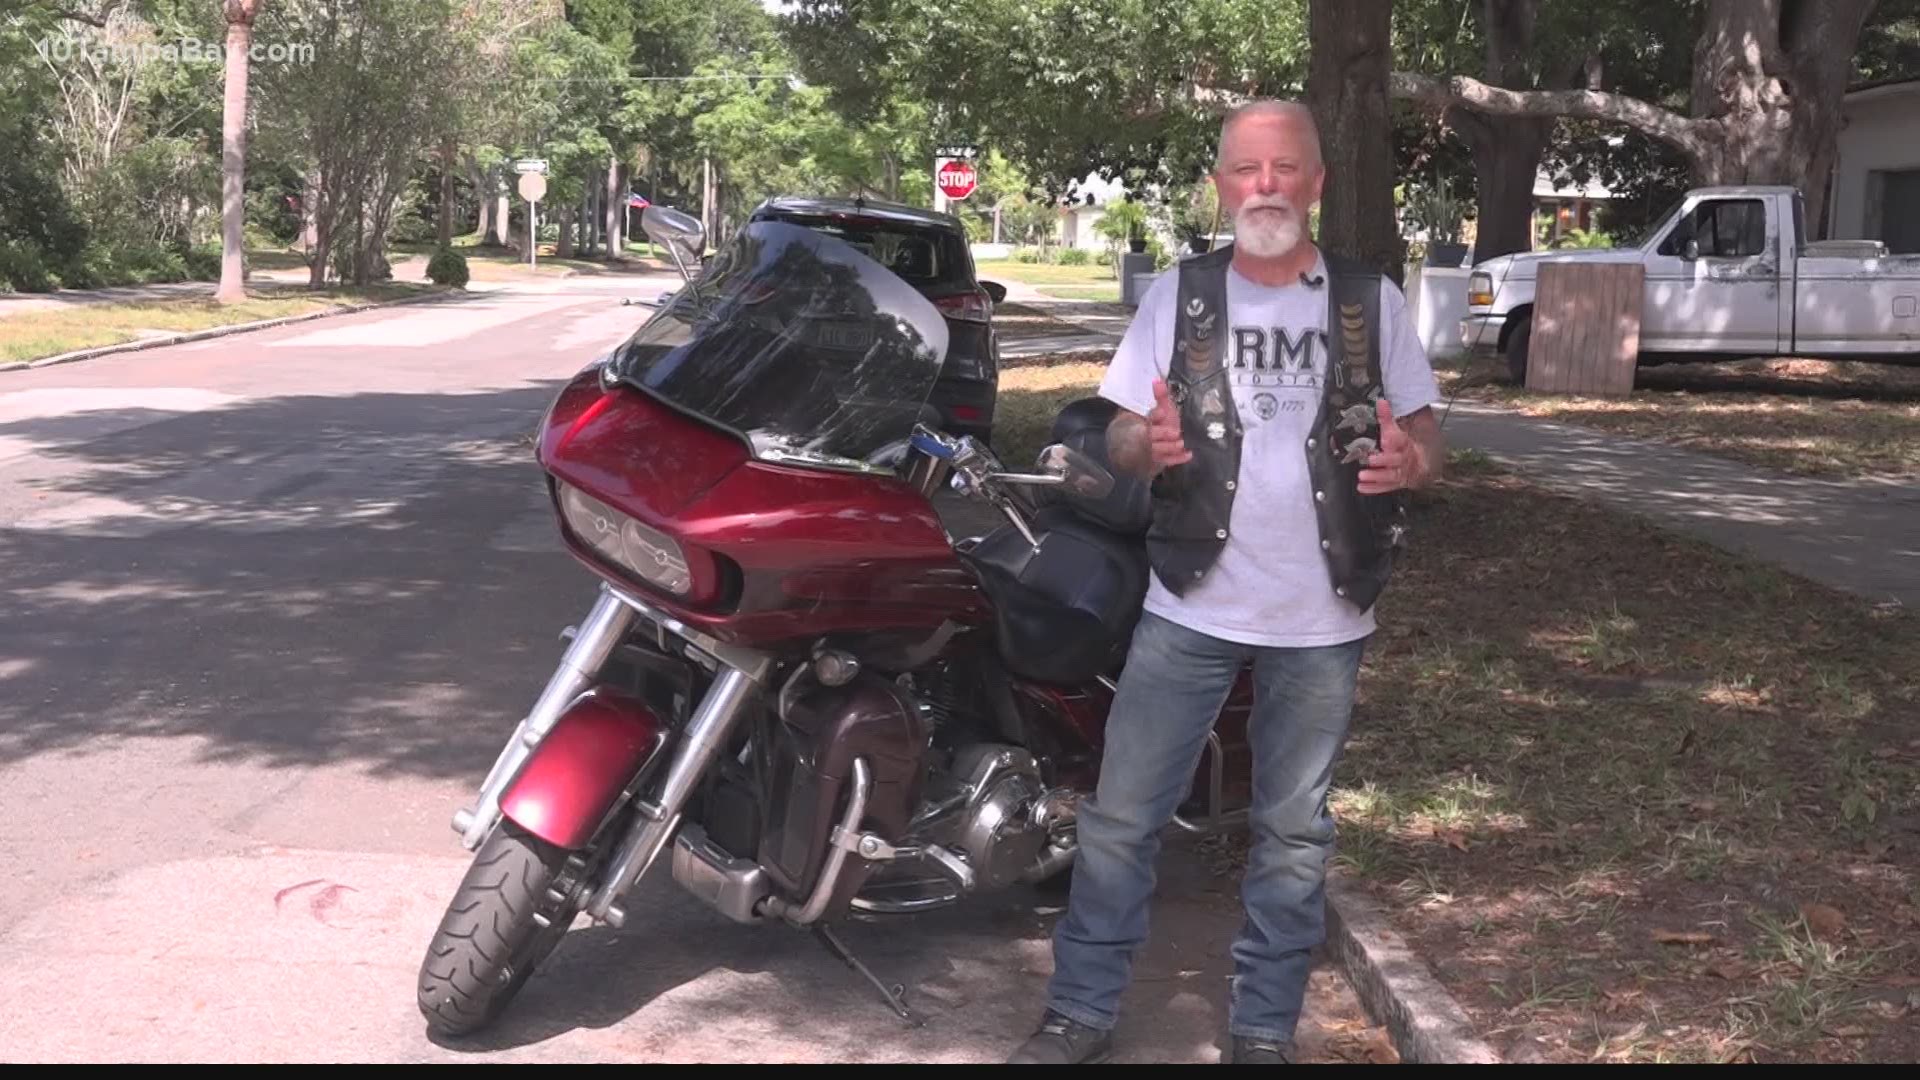 One veteran, as part of RIP Medical Debt, is riding across 32 states and covering 10,000 miles to raise money for fellow veterans and their families.